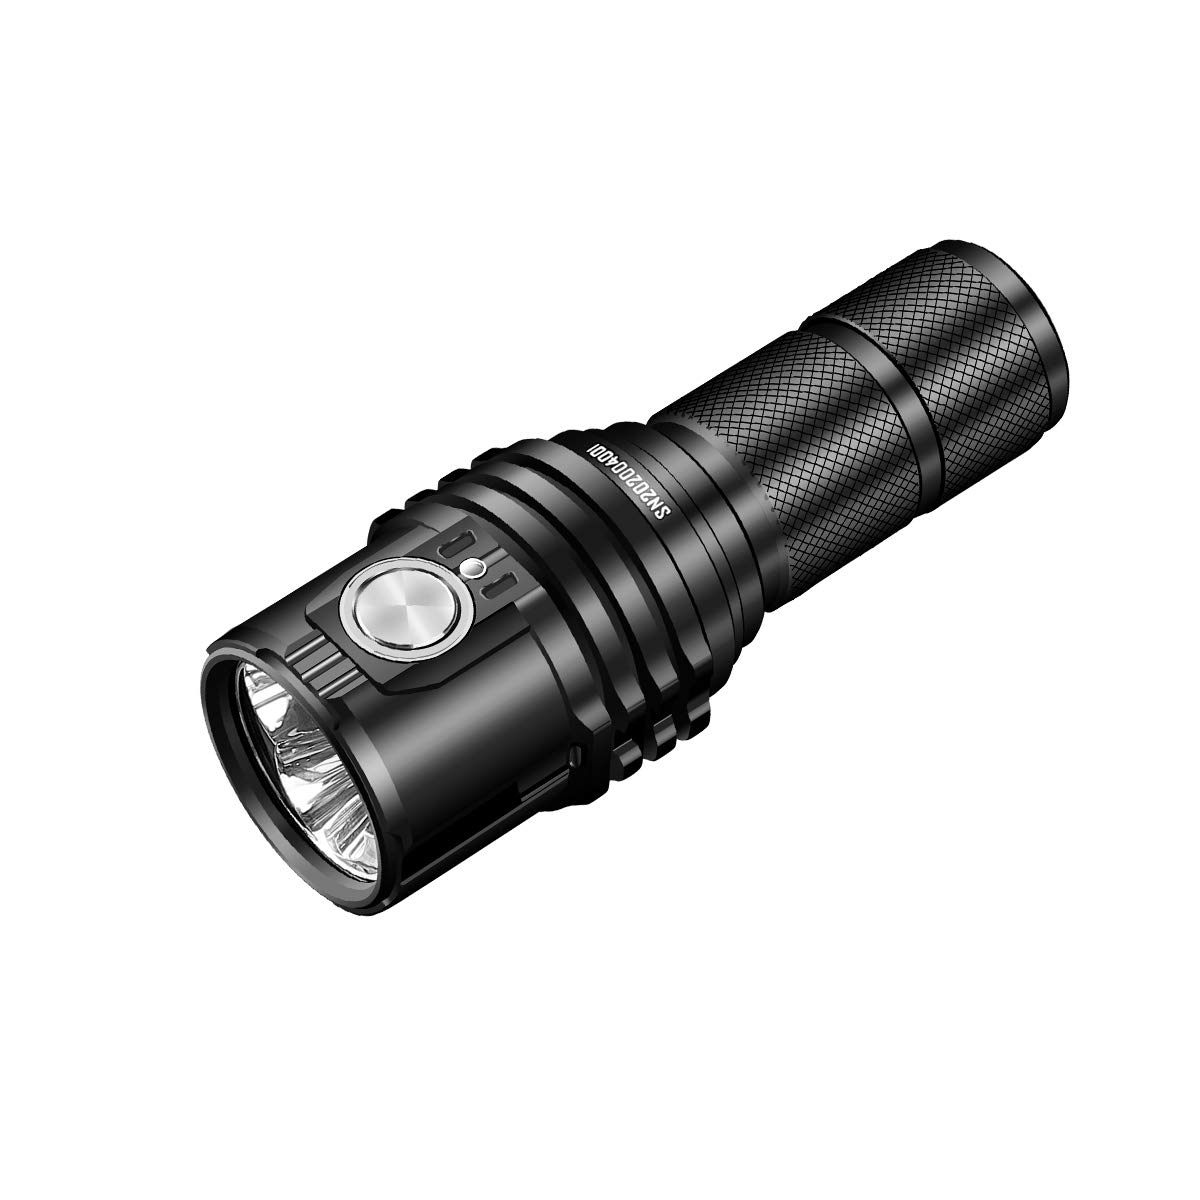 IMALENT MS03 EDC Flashlight 13000 Lumens, Cree XHP70.2nd LEDs Super Bright Led Rechargeable Flashlight, Suitable for Searching, Patrol and Fishing